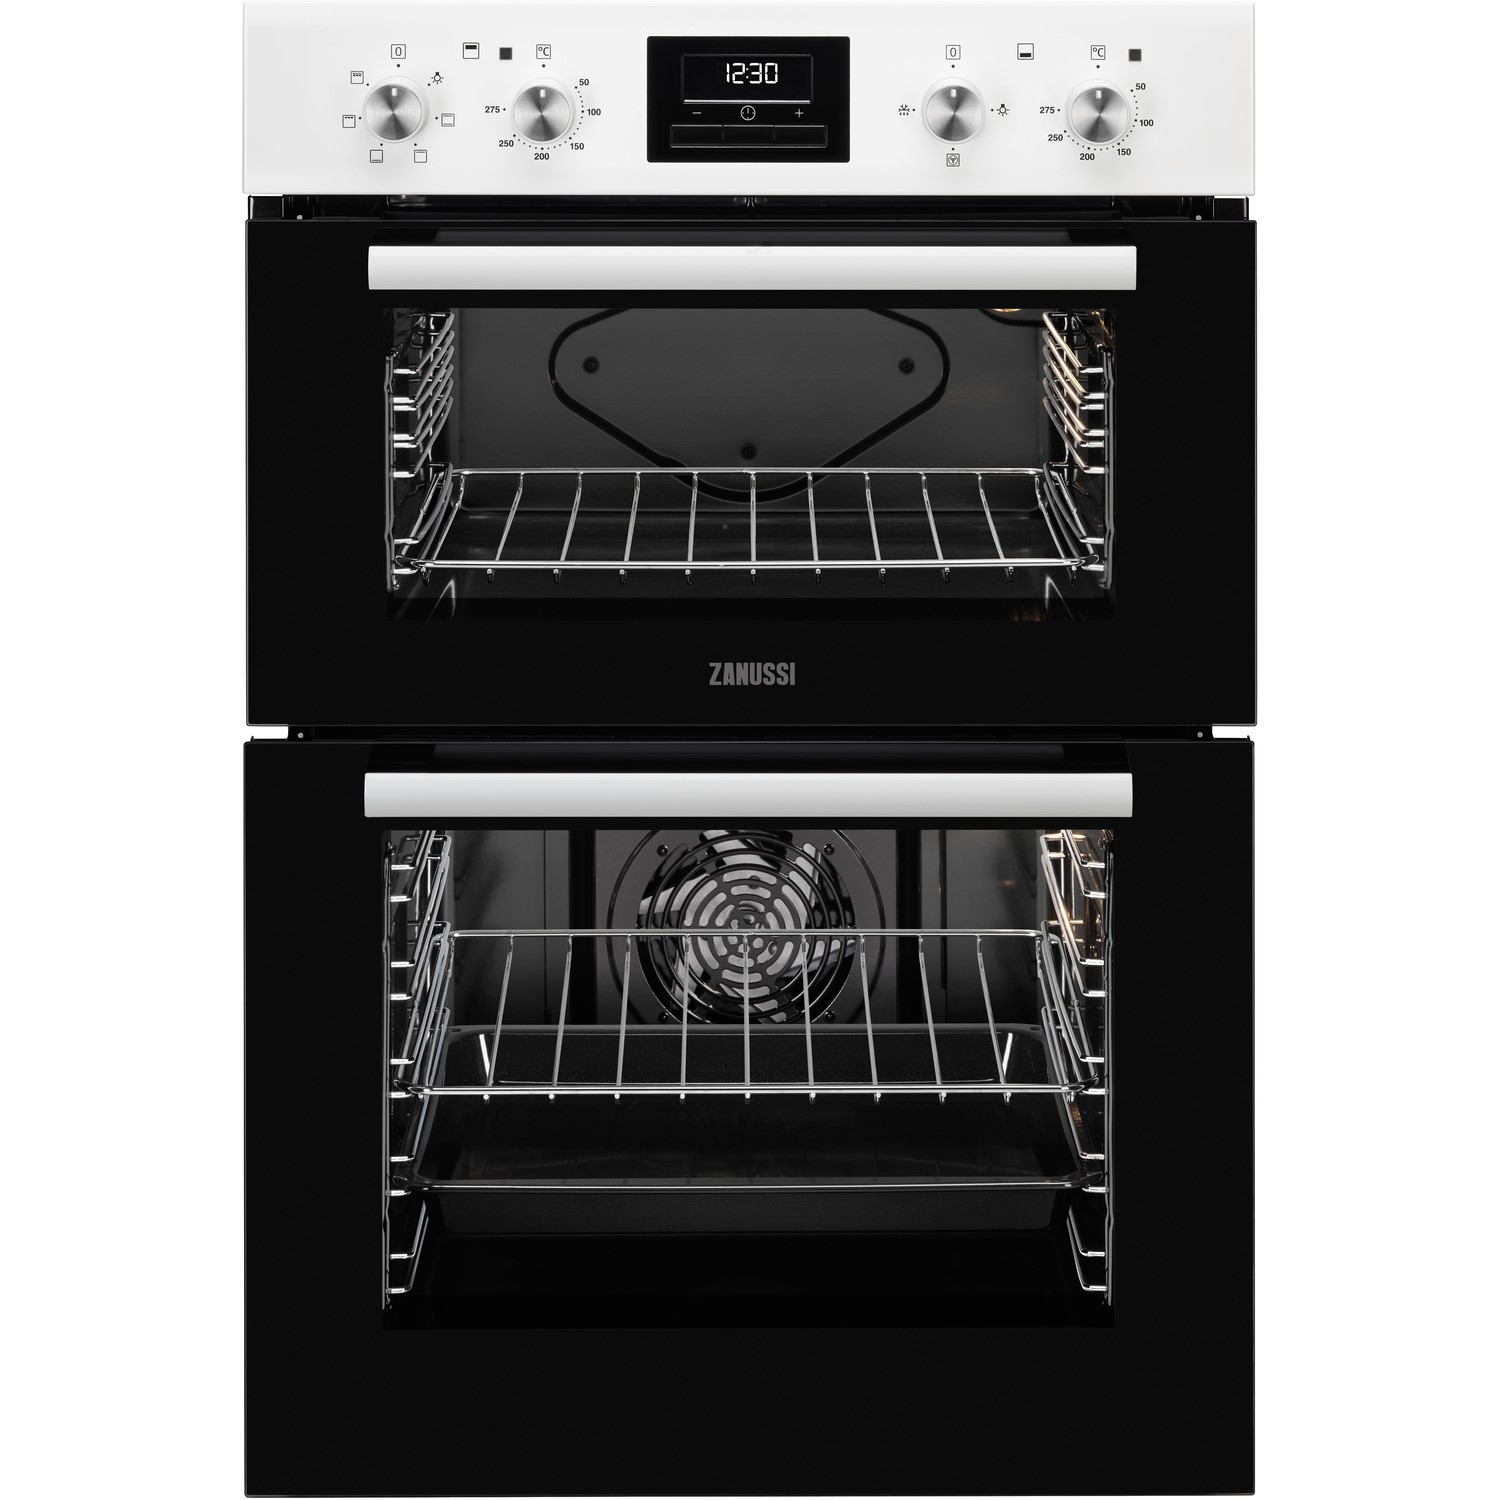 Refurbished Zanussi ZOD35661WK 60cm Double Built In Electric Oven